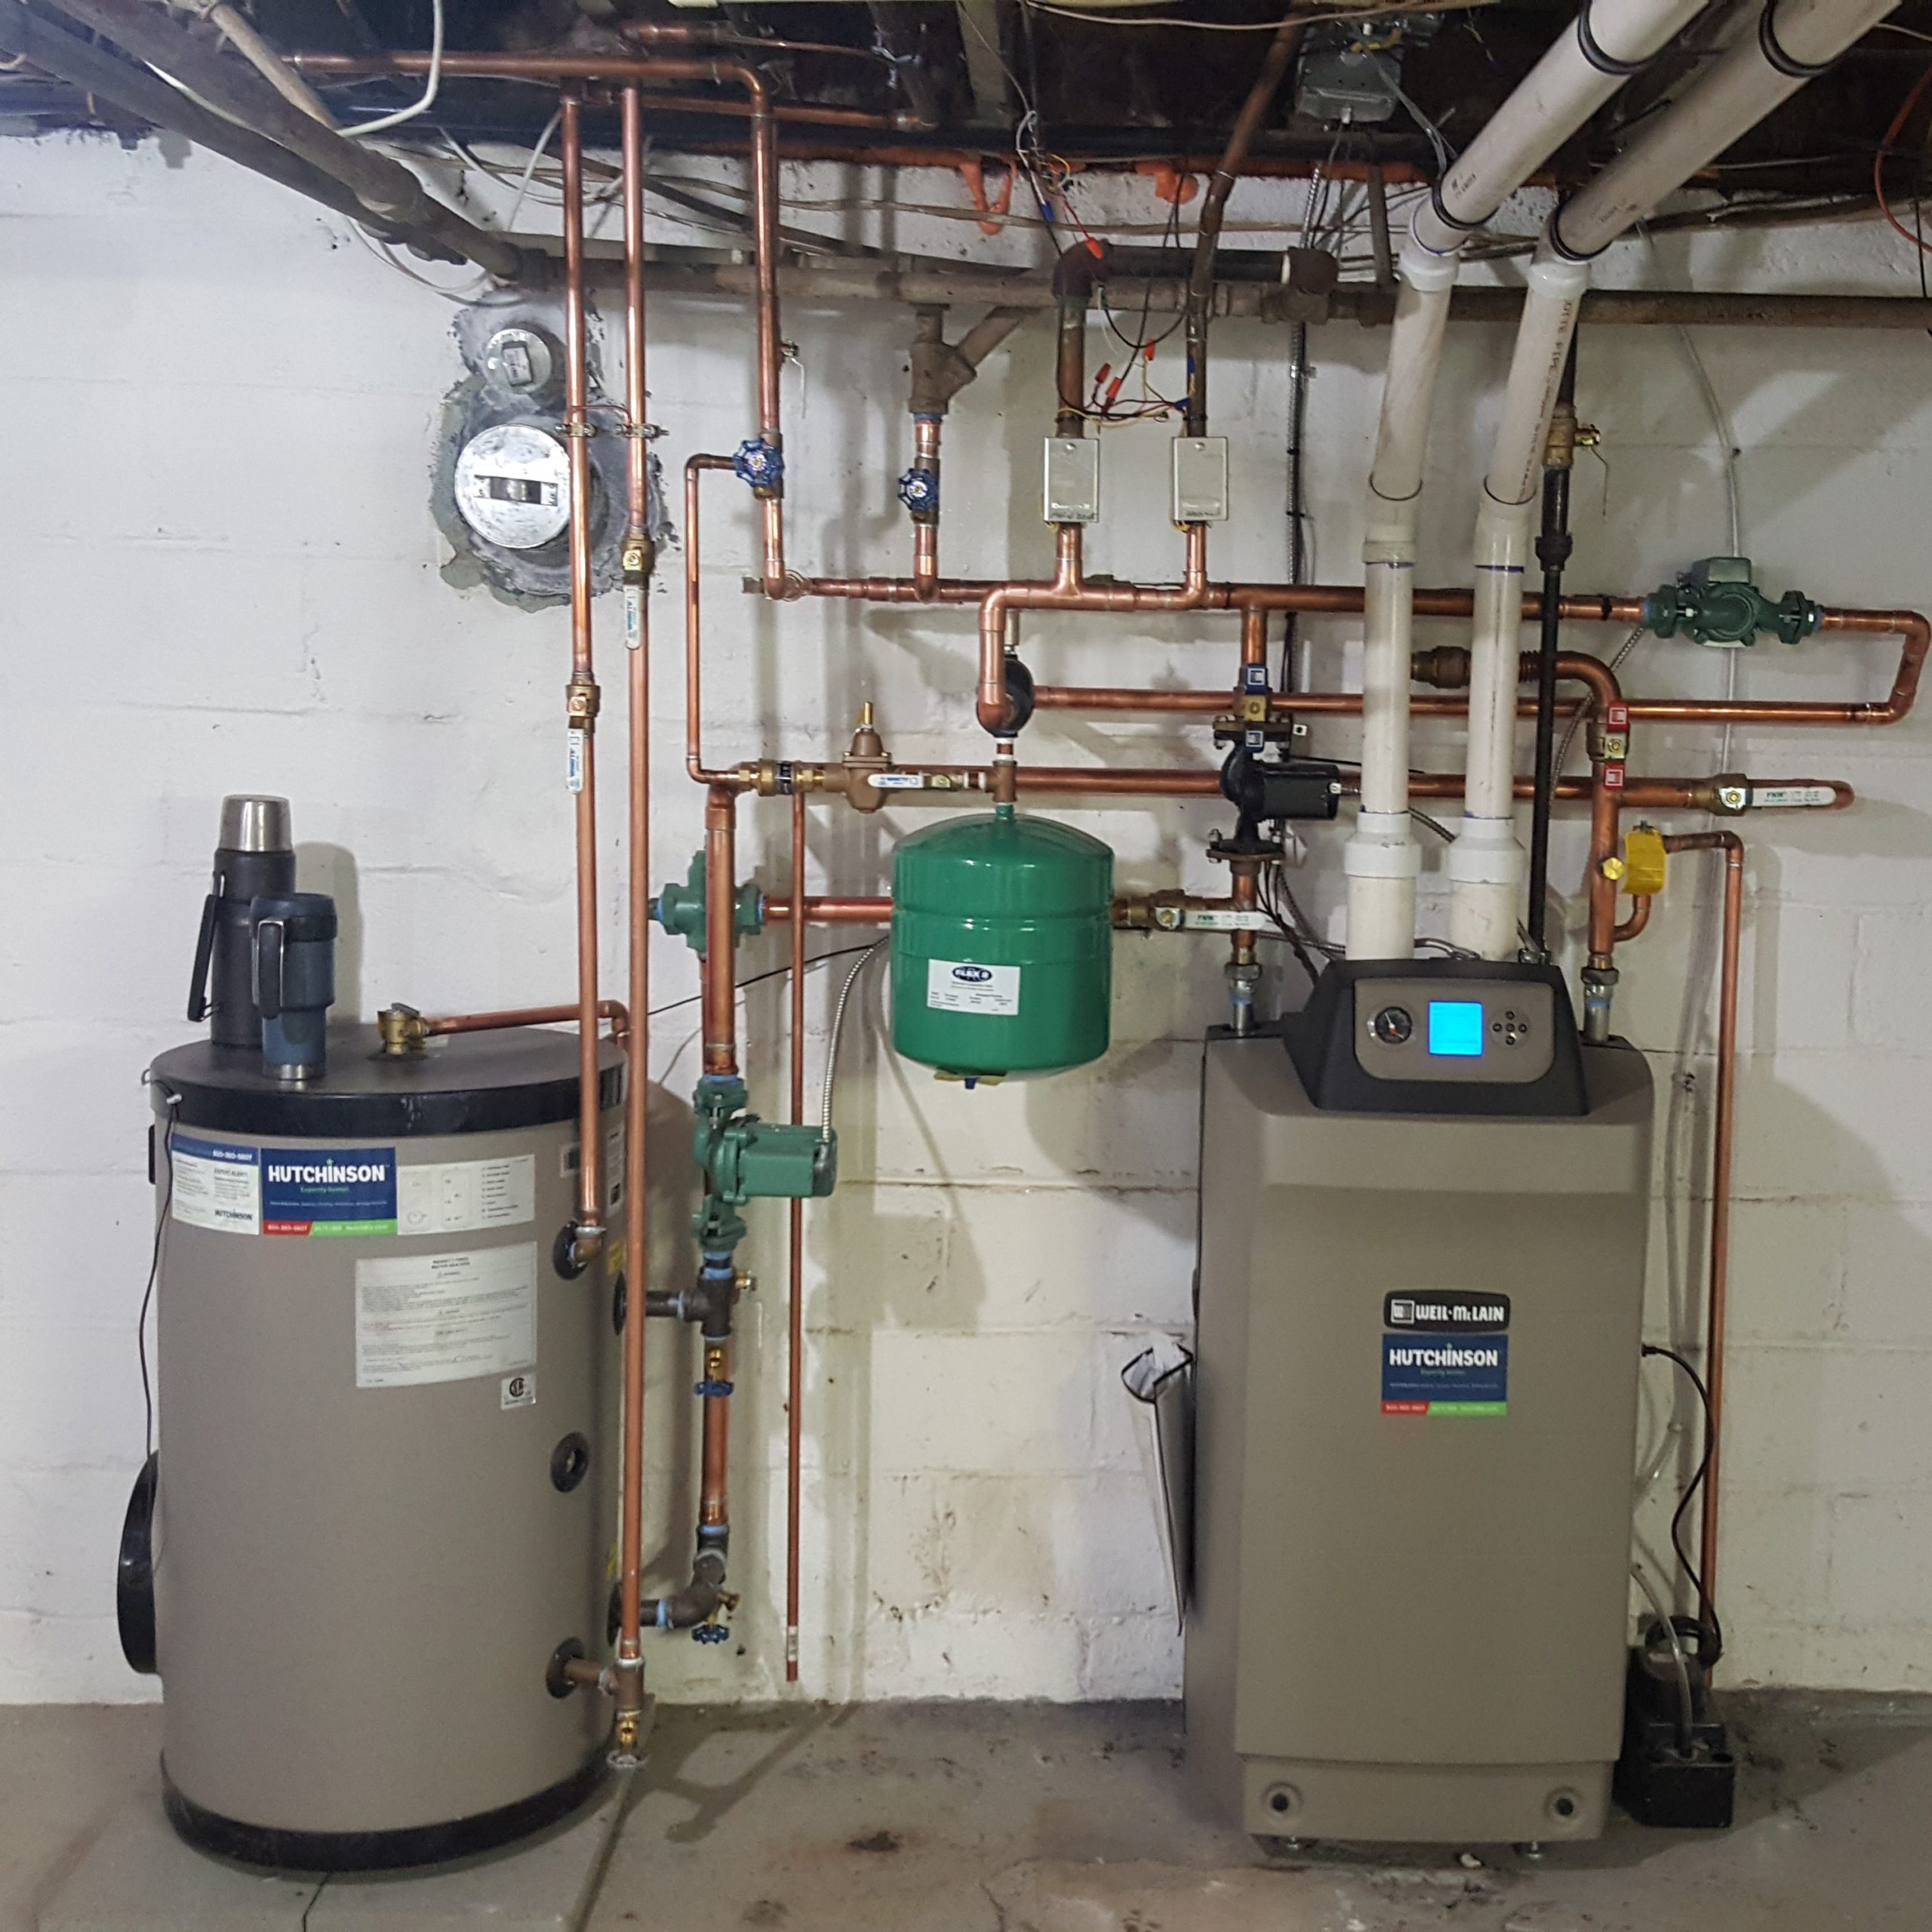 Plumbing, Heating and Air Conditioning Services in Manahawkin, NJ